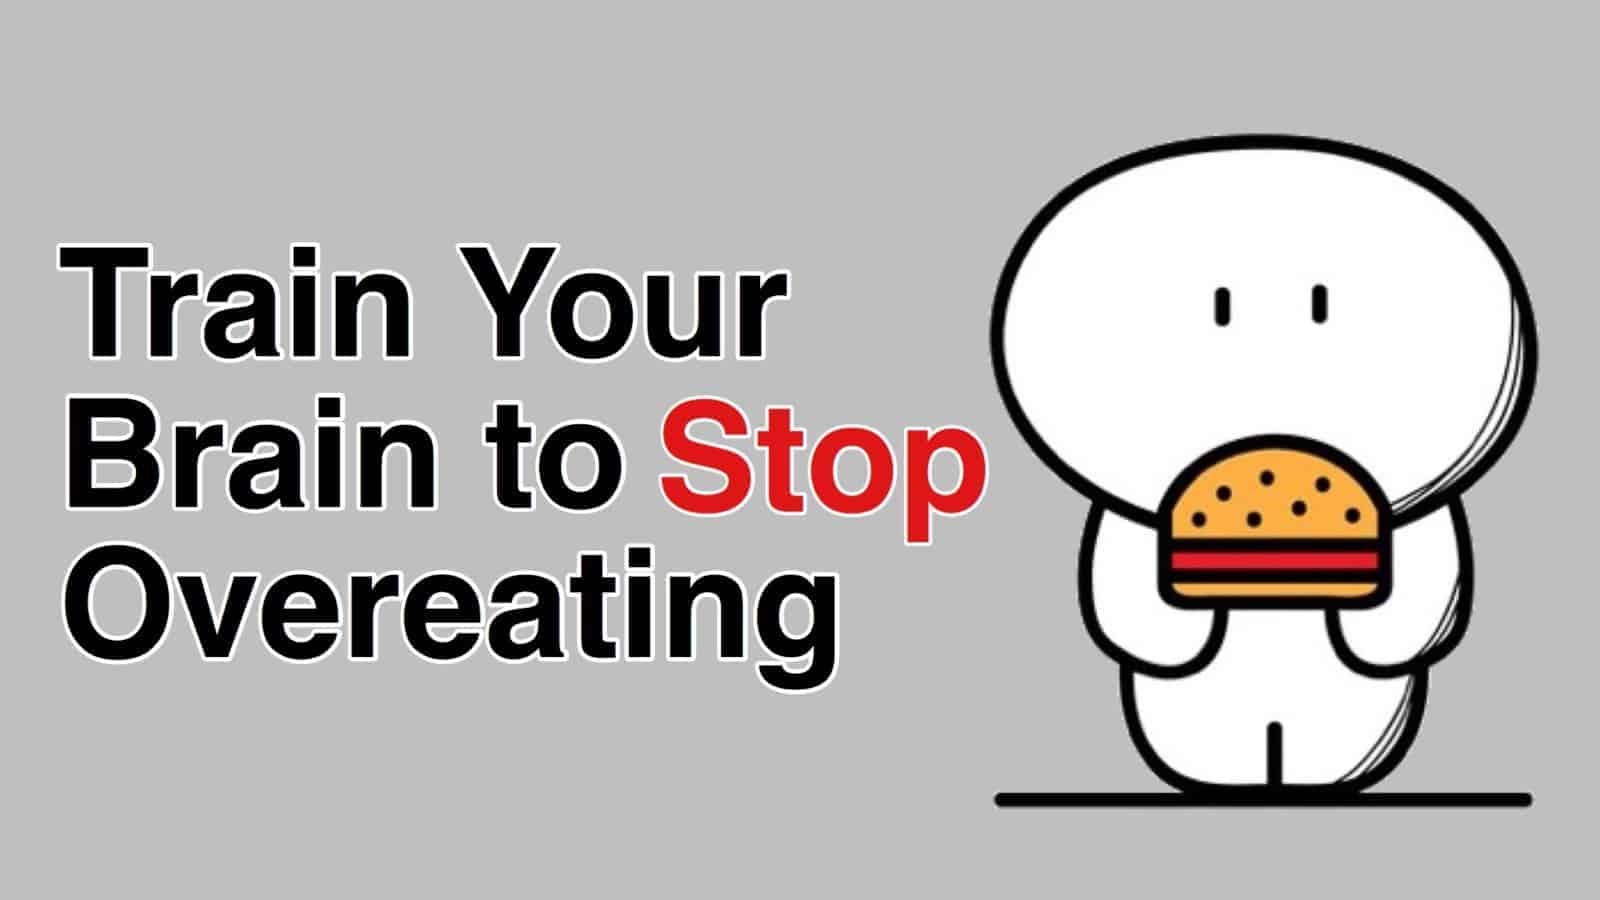 How to Train Your Brain To Stop Overeating